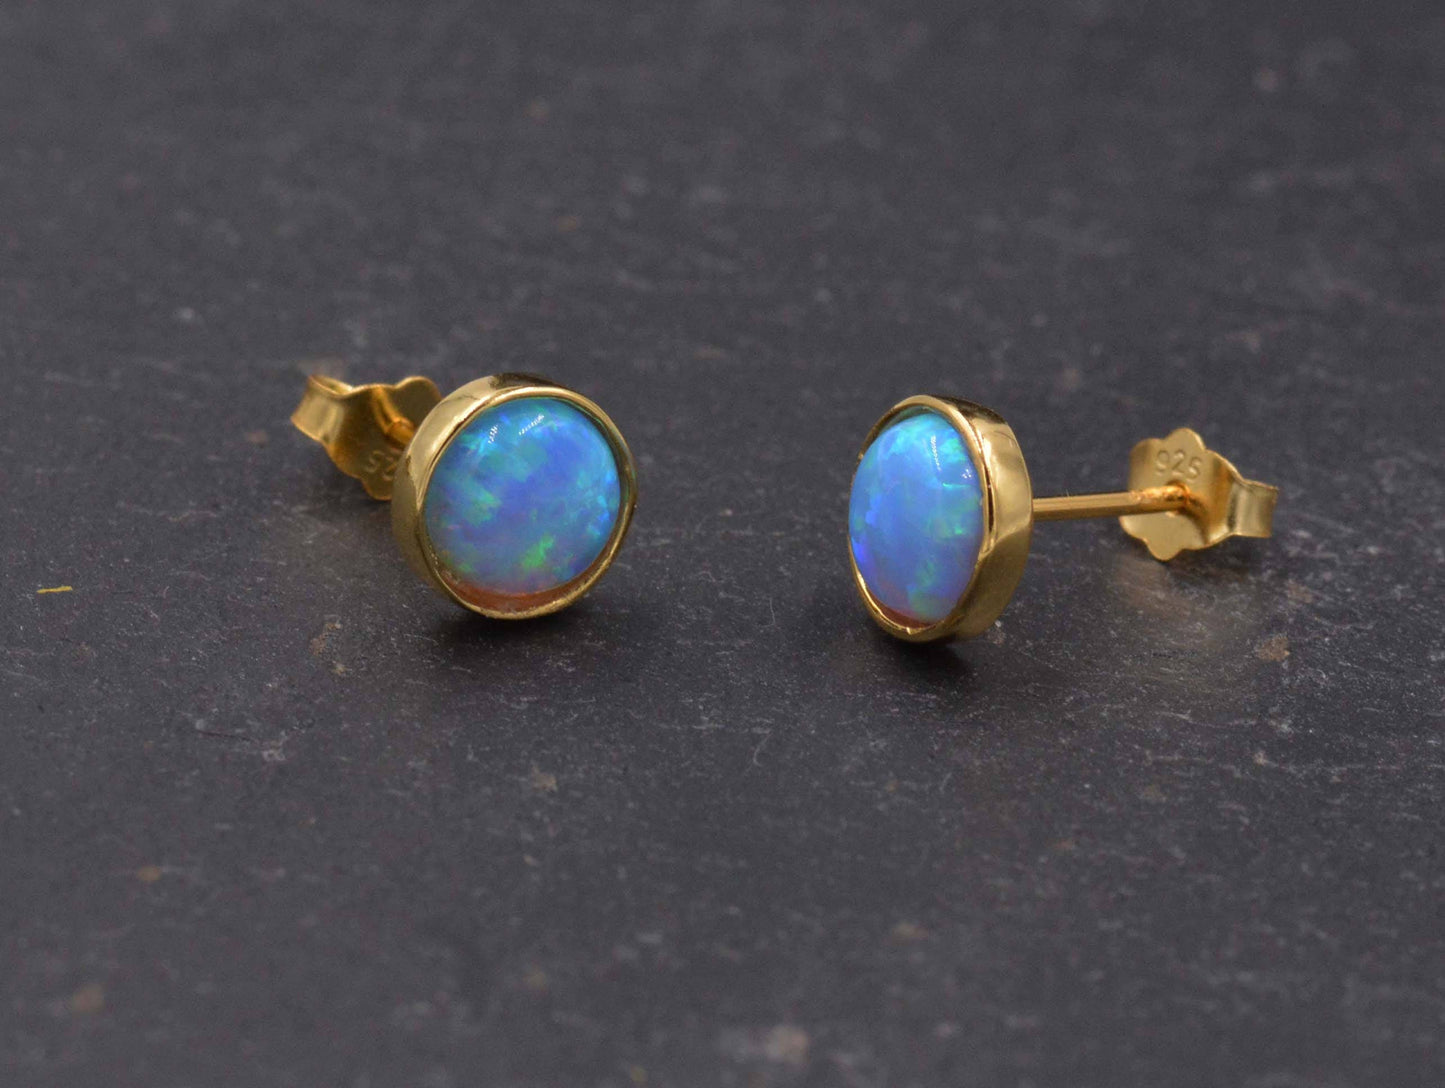 Gold Vermeil (Gold Plated Sterling Silver) Blue and White Opal Stone Crystal Stud Earrings. Round Minimalist Dot Geometric Design.